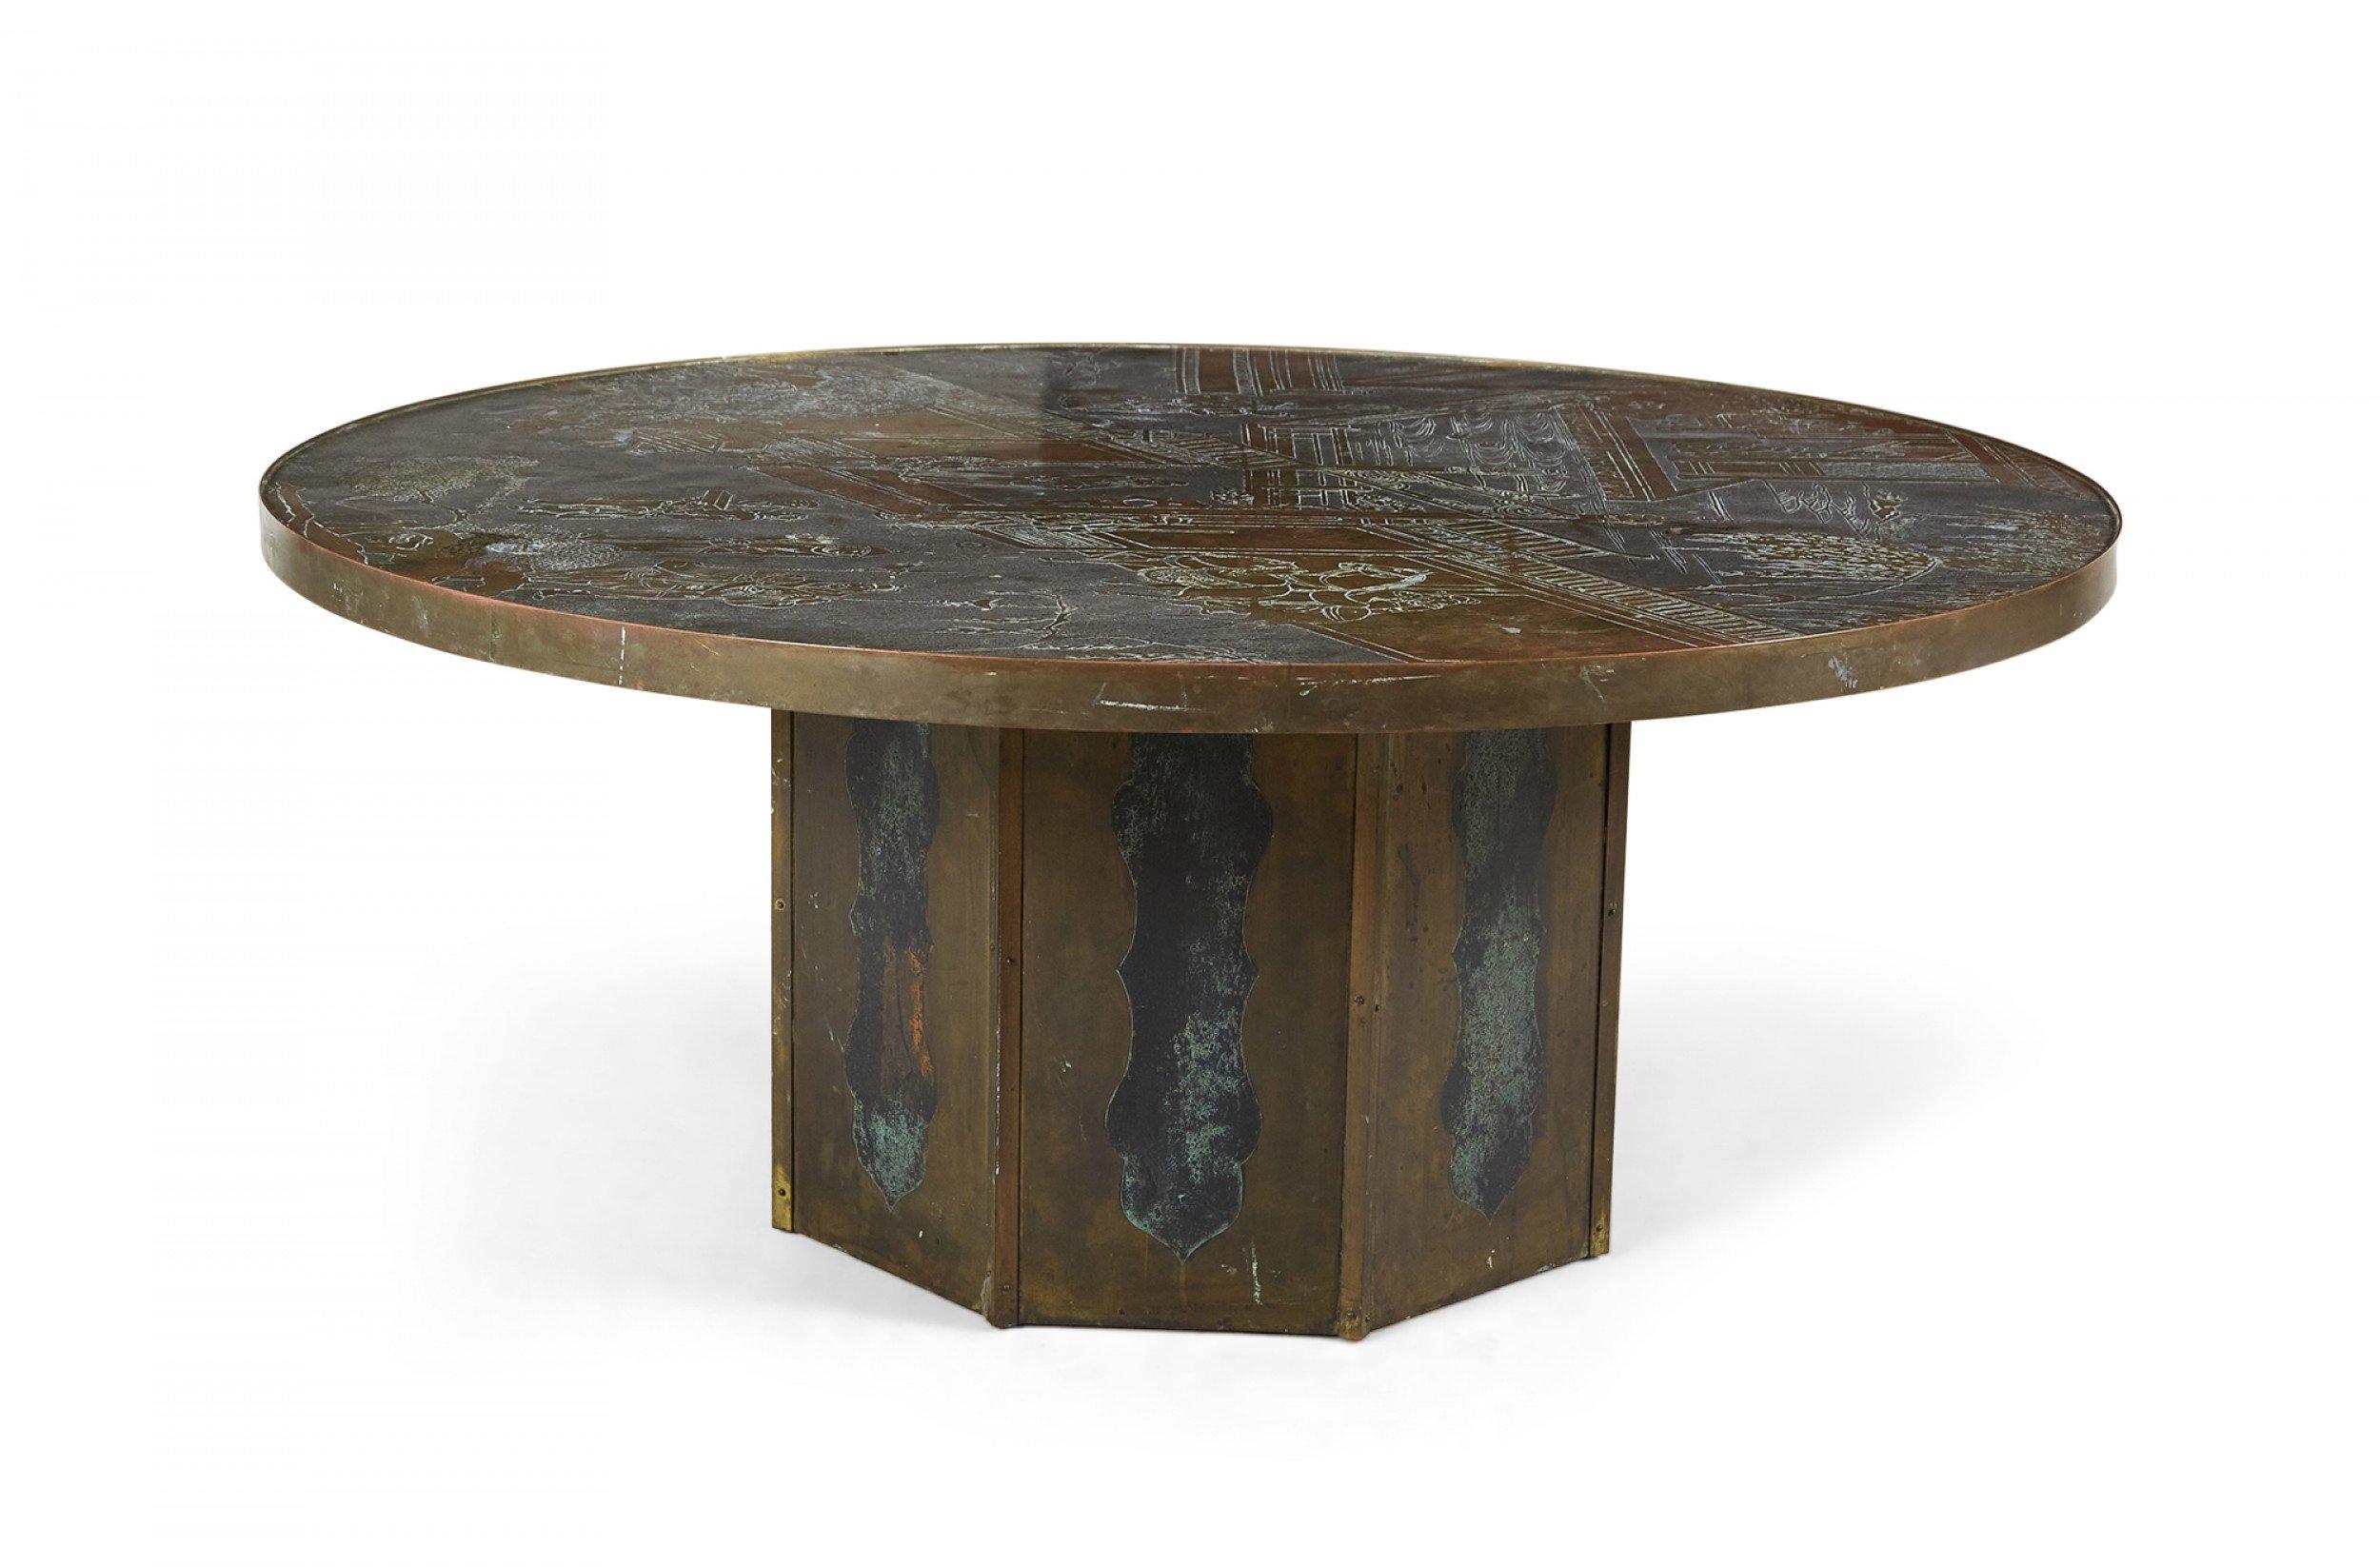 American mid-century coffee table with a circular etched bronze veneer top depicting an elaborate Chinoiserie genre scene with natural patina above a bronze veneer octagonal base. (